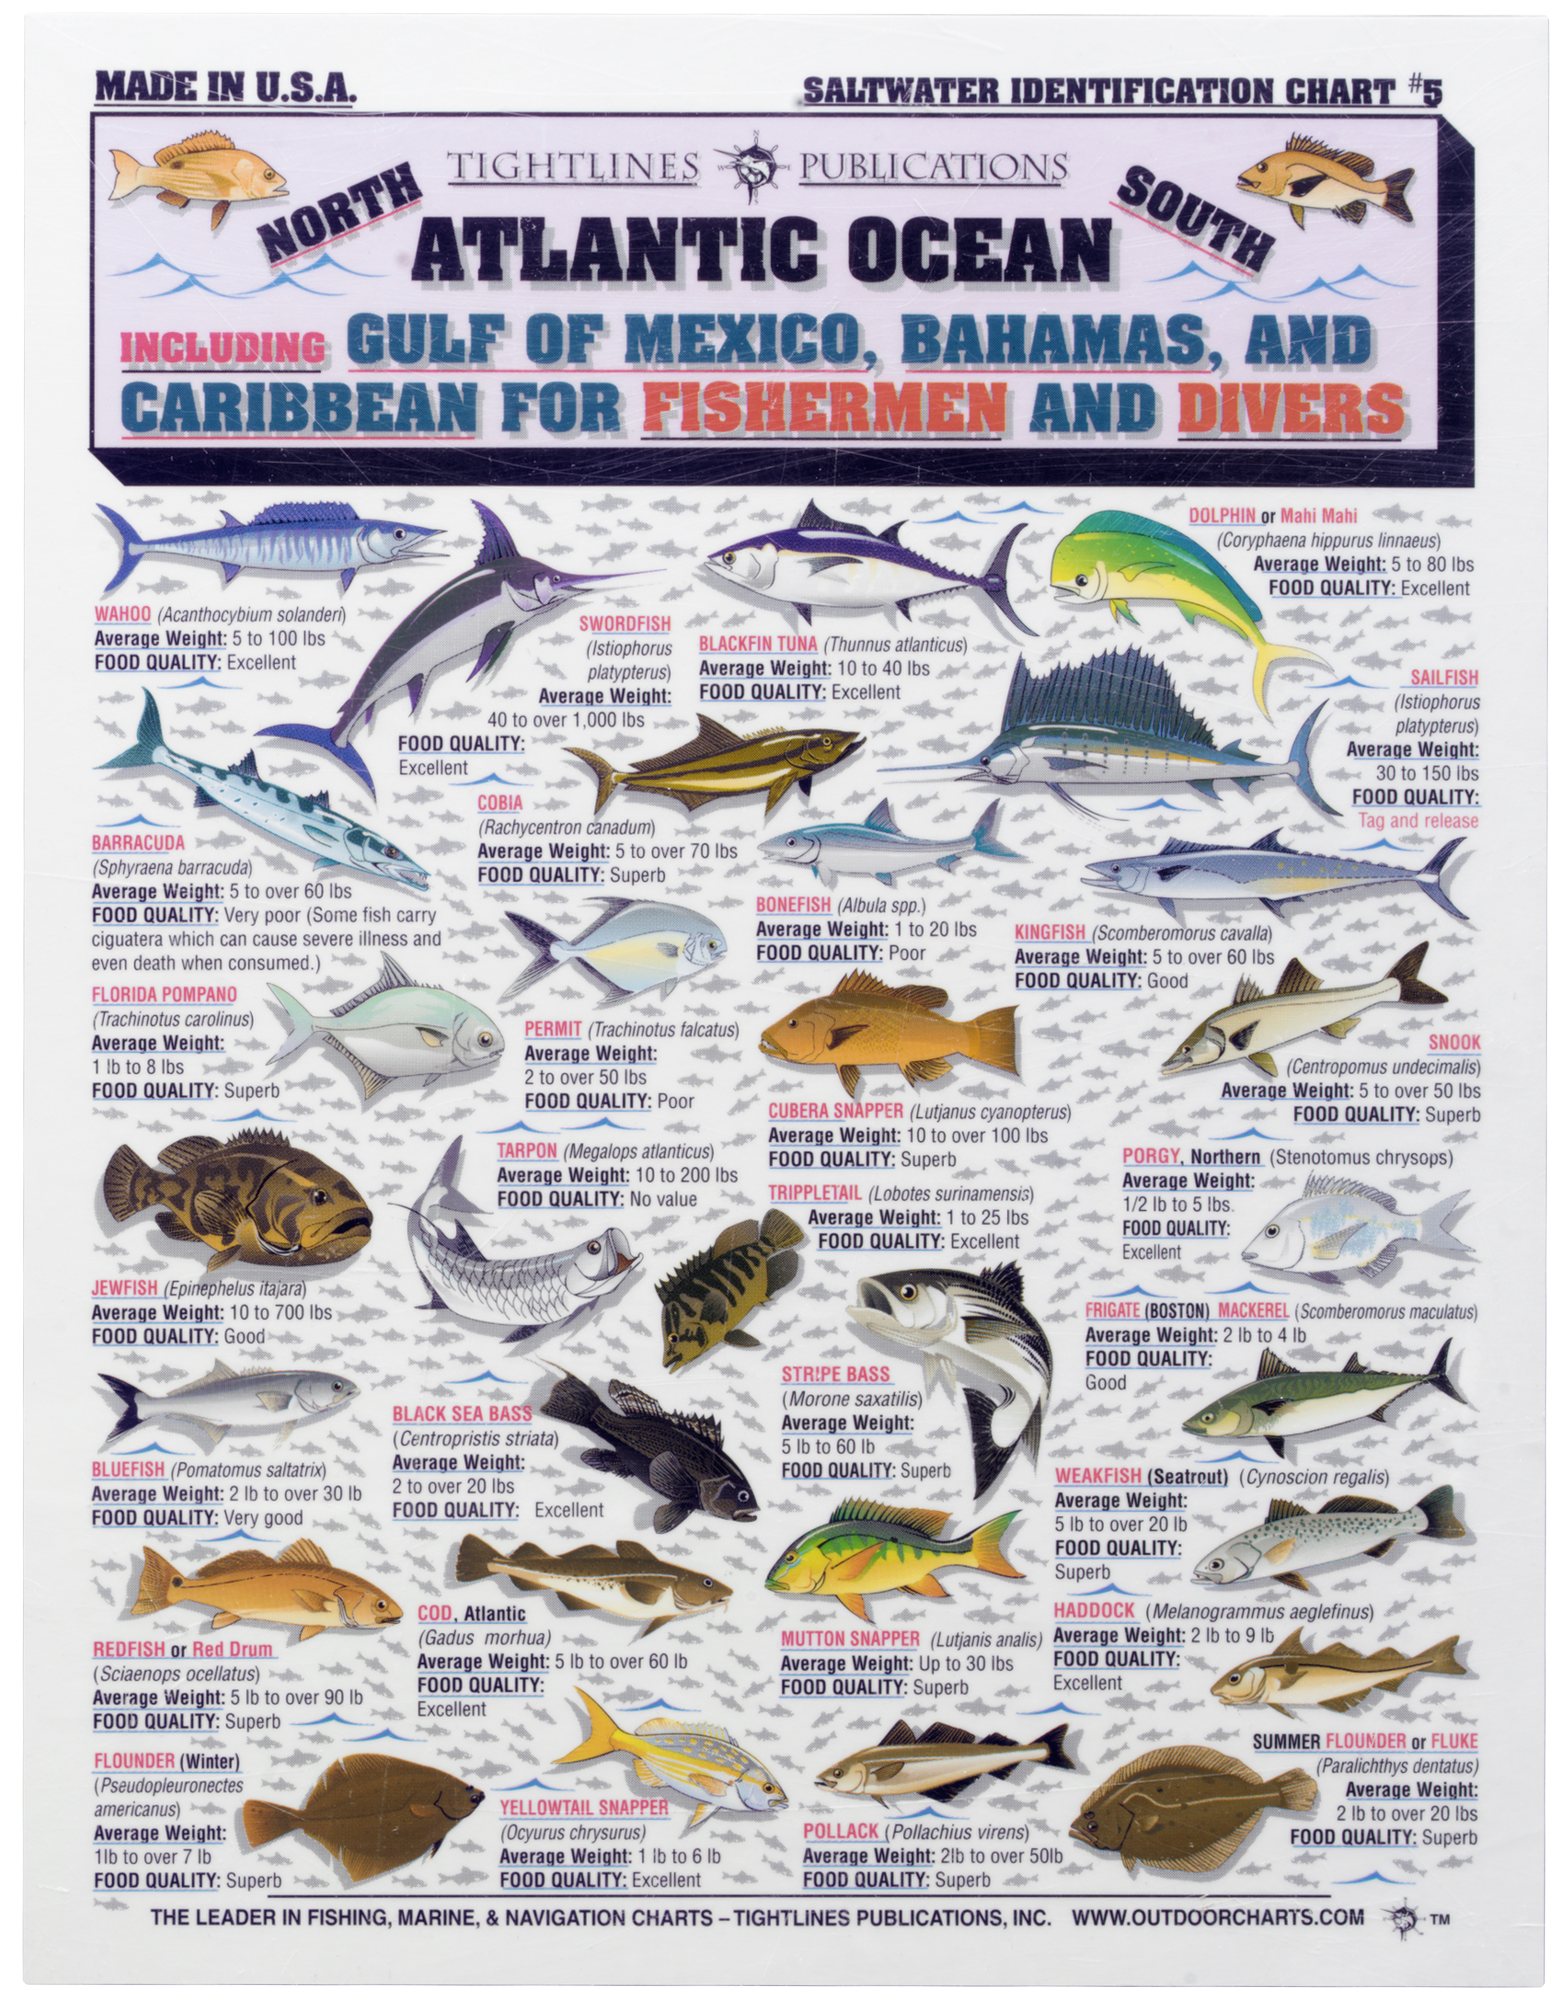 Florida Saltwater Fish ID Book by Saltwater Fish ID, Inc.